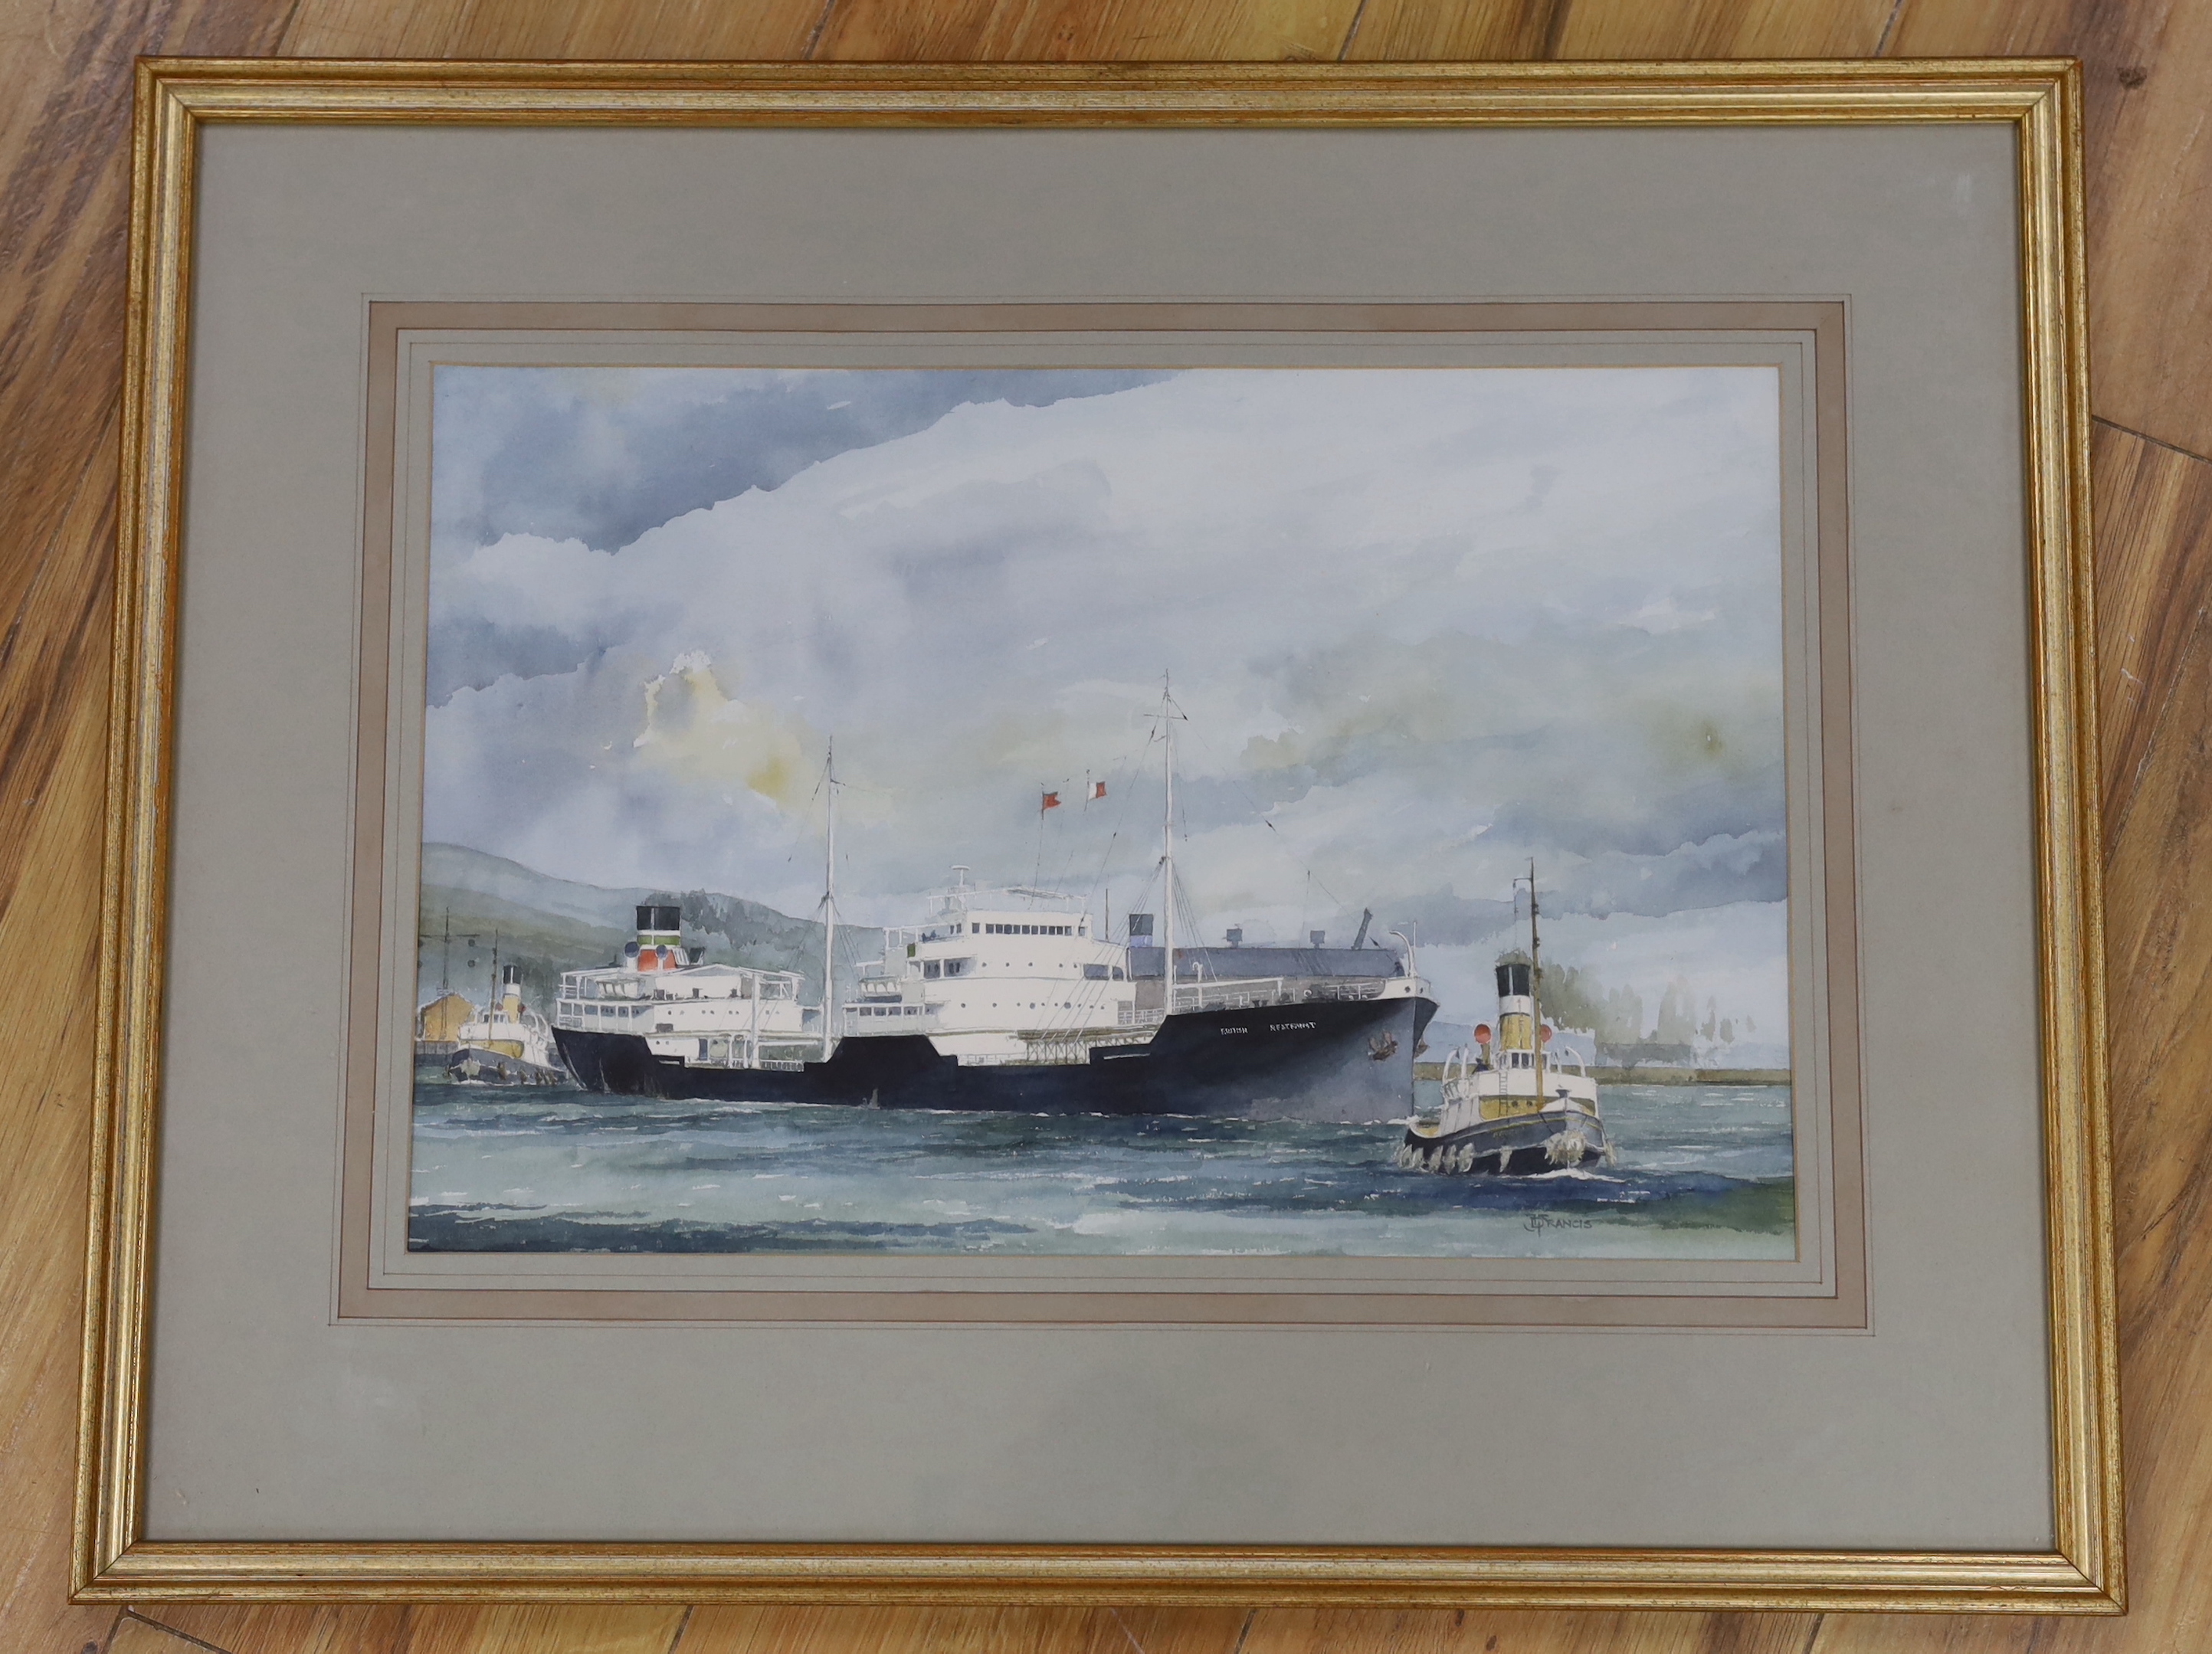 J D Francis, watercolour, 'The BP tanker British Restraint clearing King's Dock, Swansea', signed and inscribed verso, 42 x 28cm